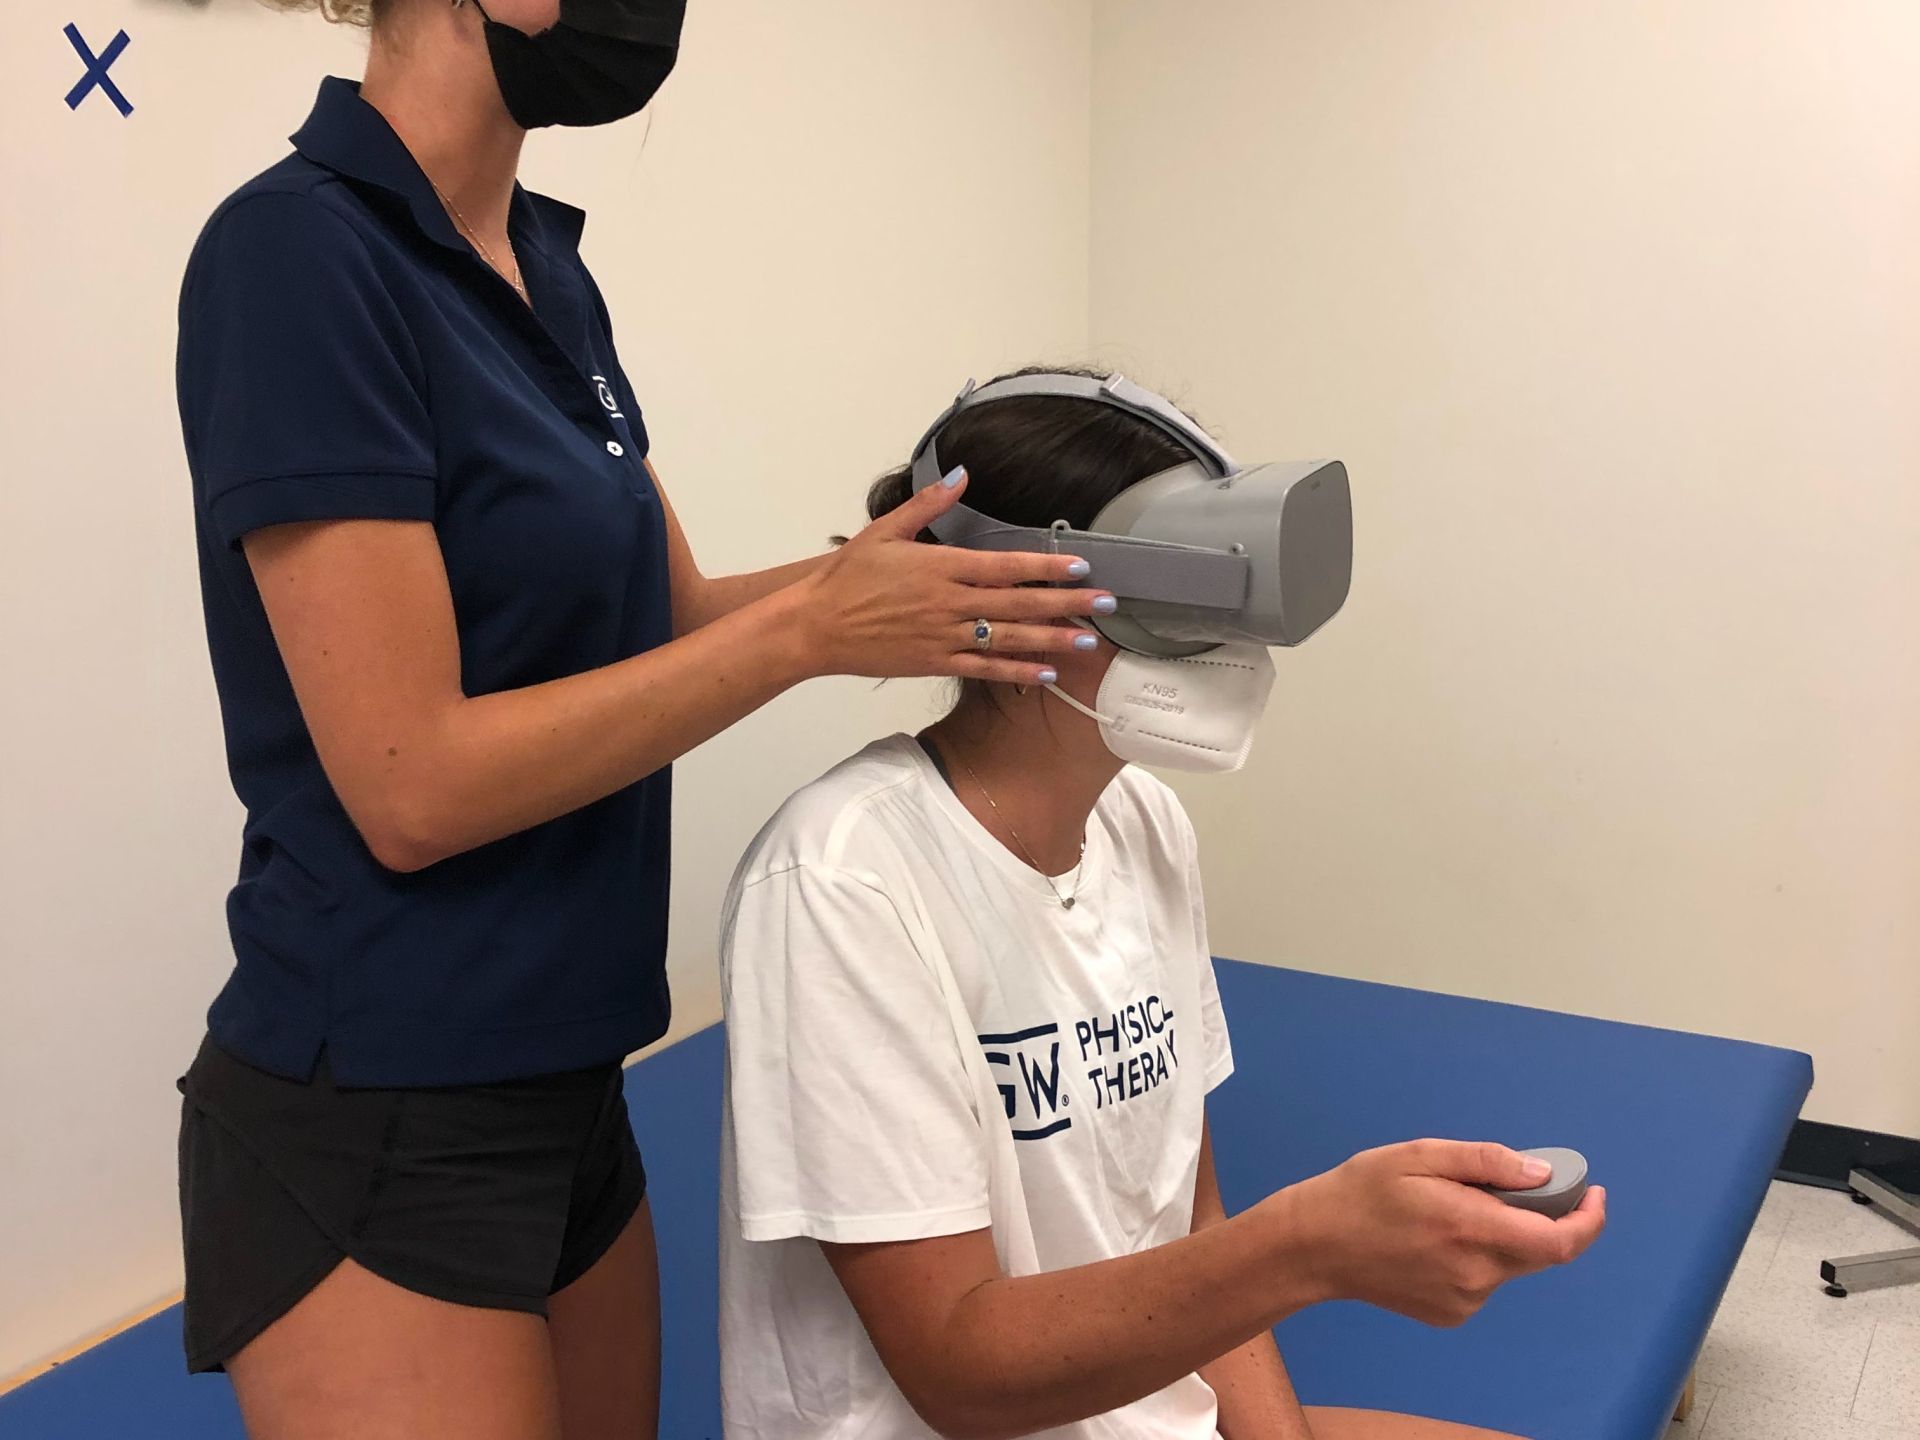 Student research assistants demonstrating use of a virtual reality headset